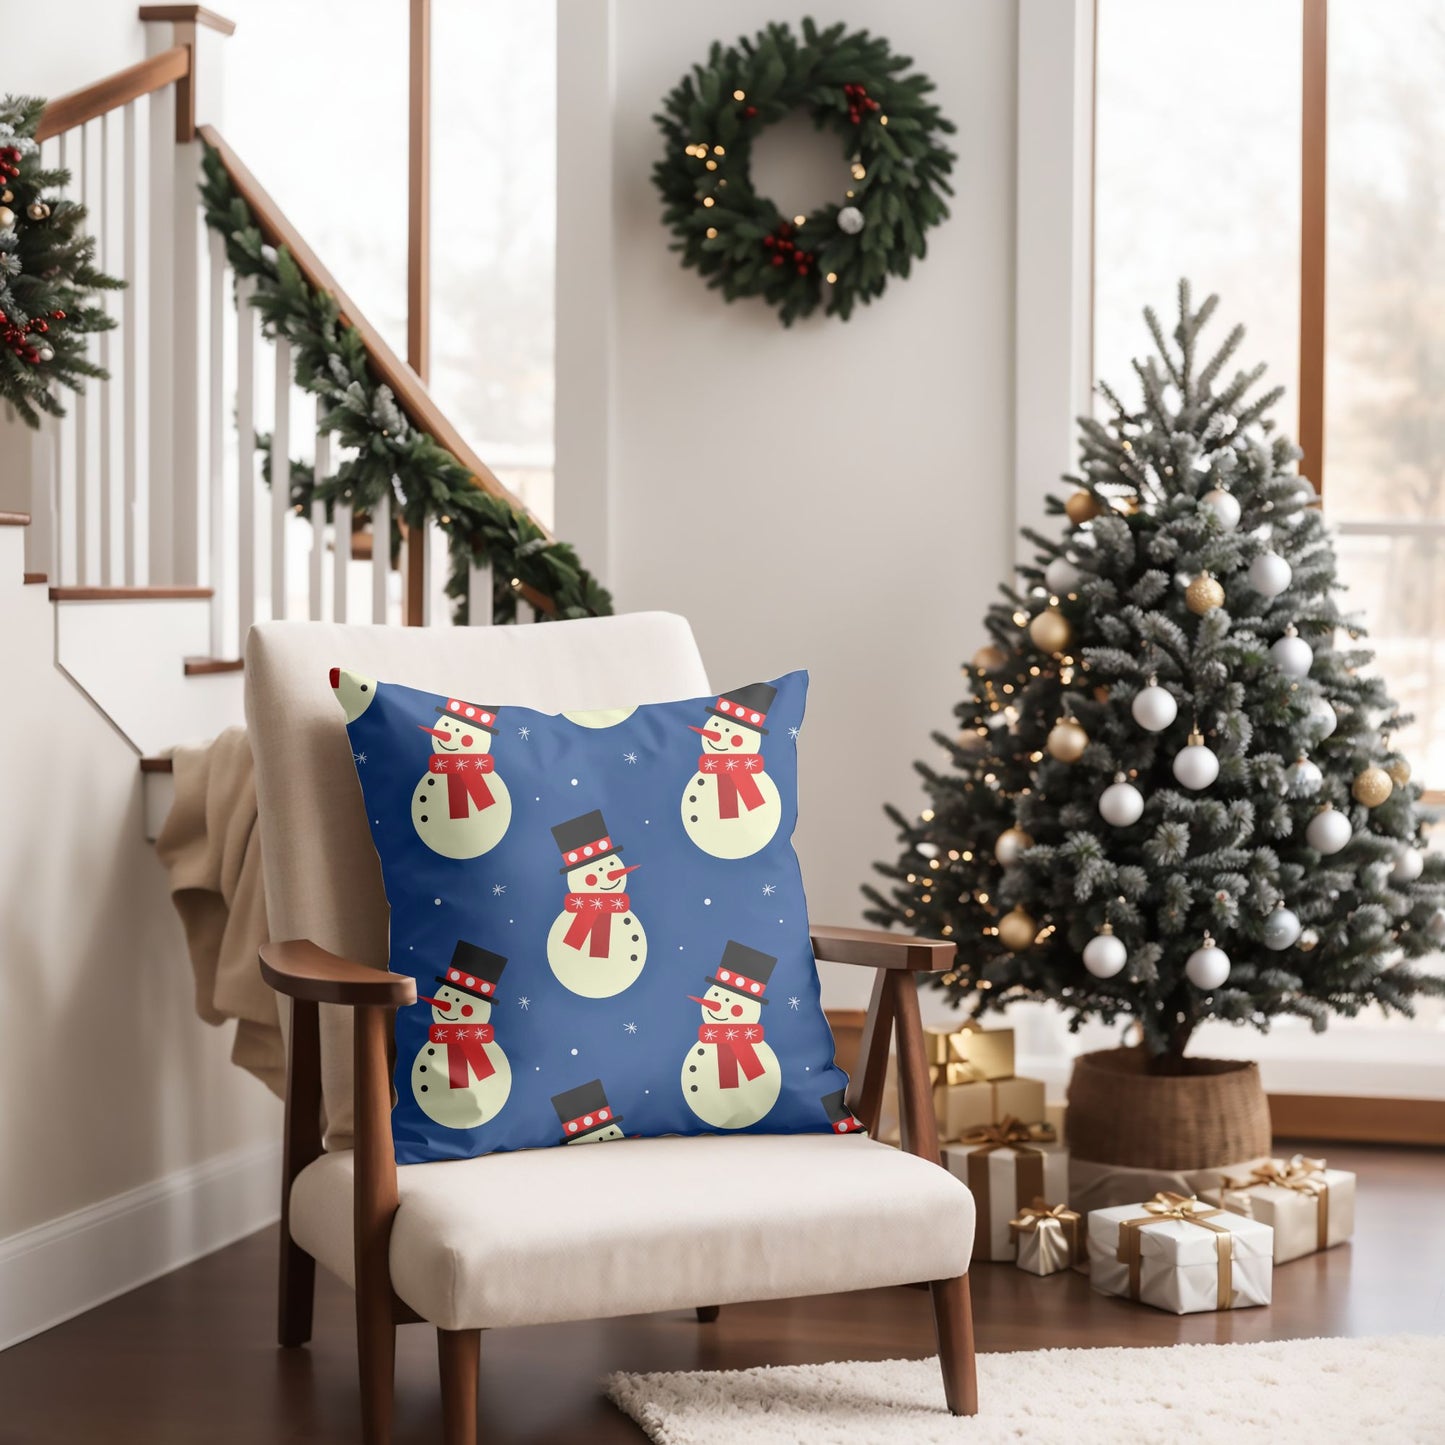 Cozy Pillow with Whimsical Snowman Design